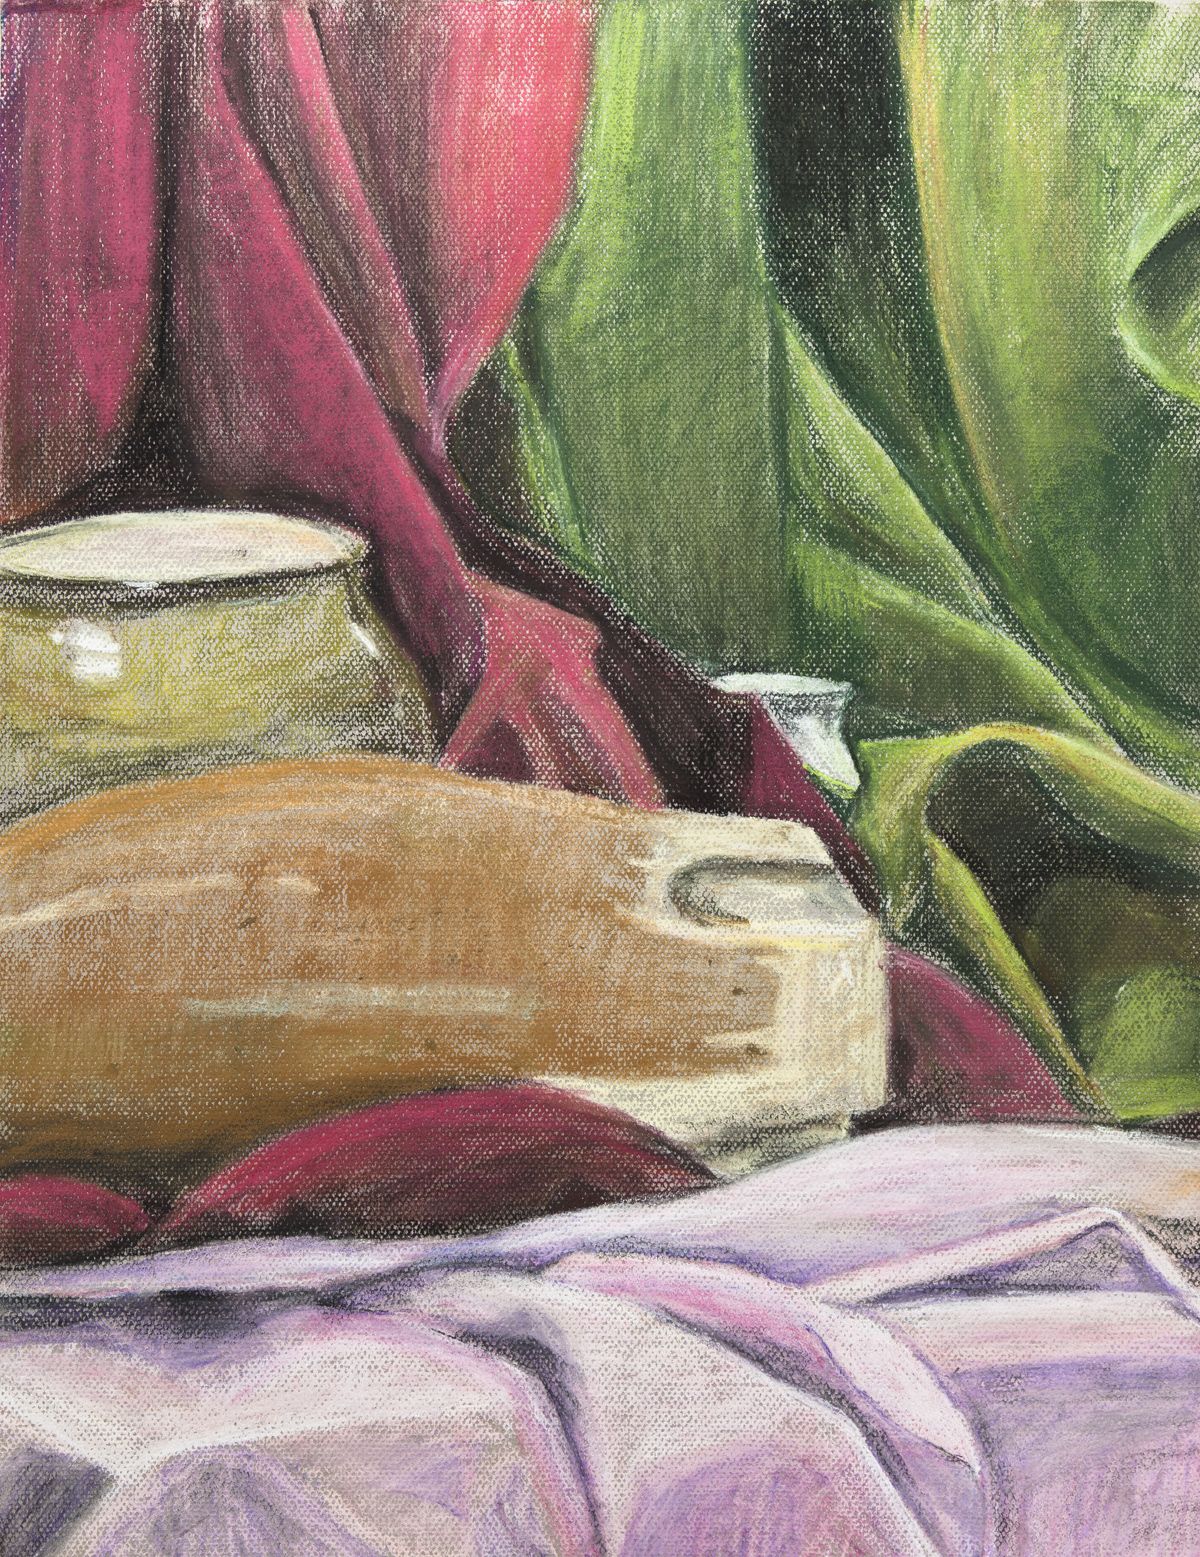 2012, Pastel on Paper, 23 1/4 x 18 in.